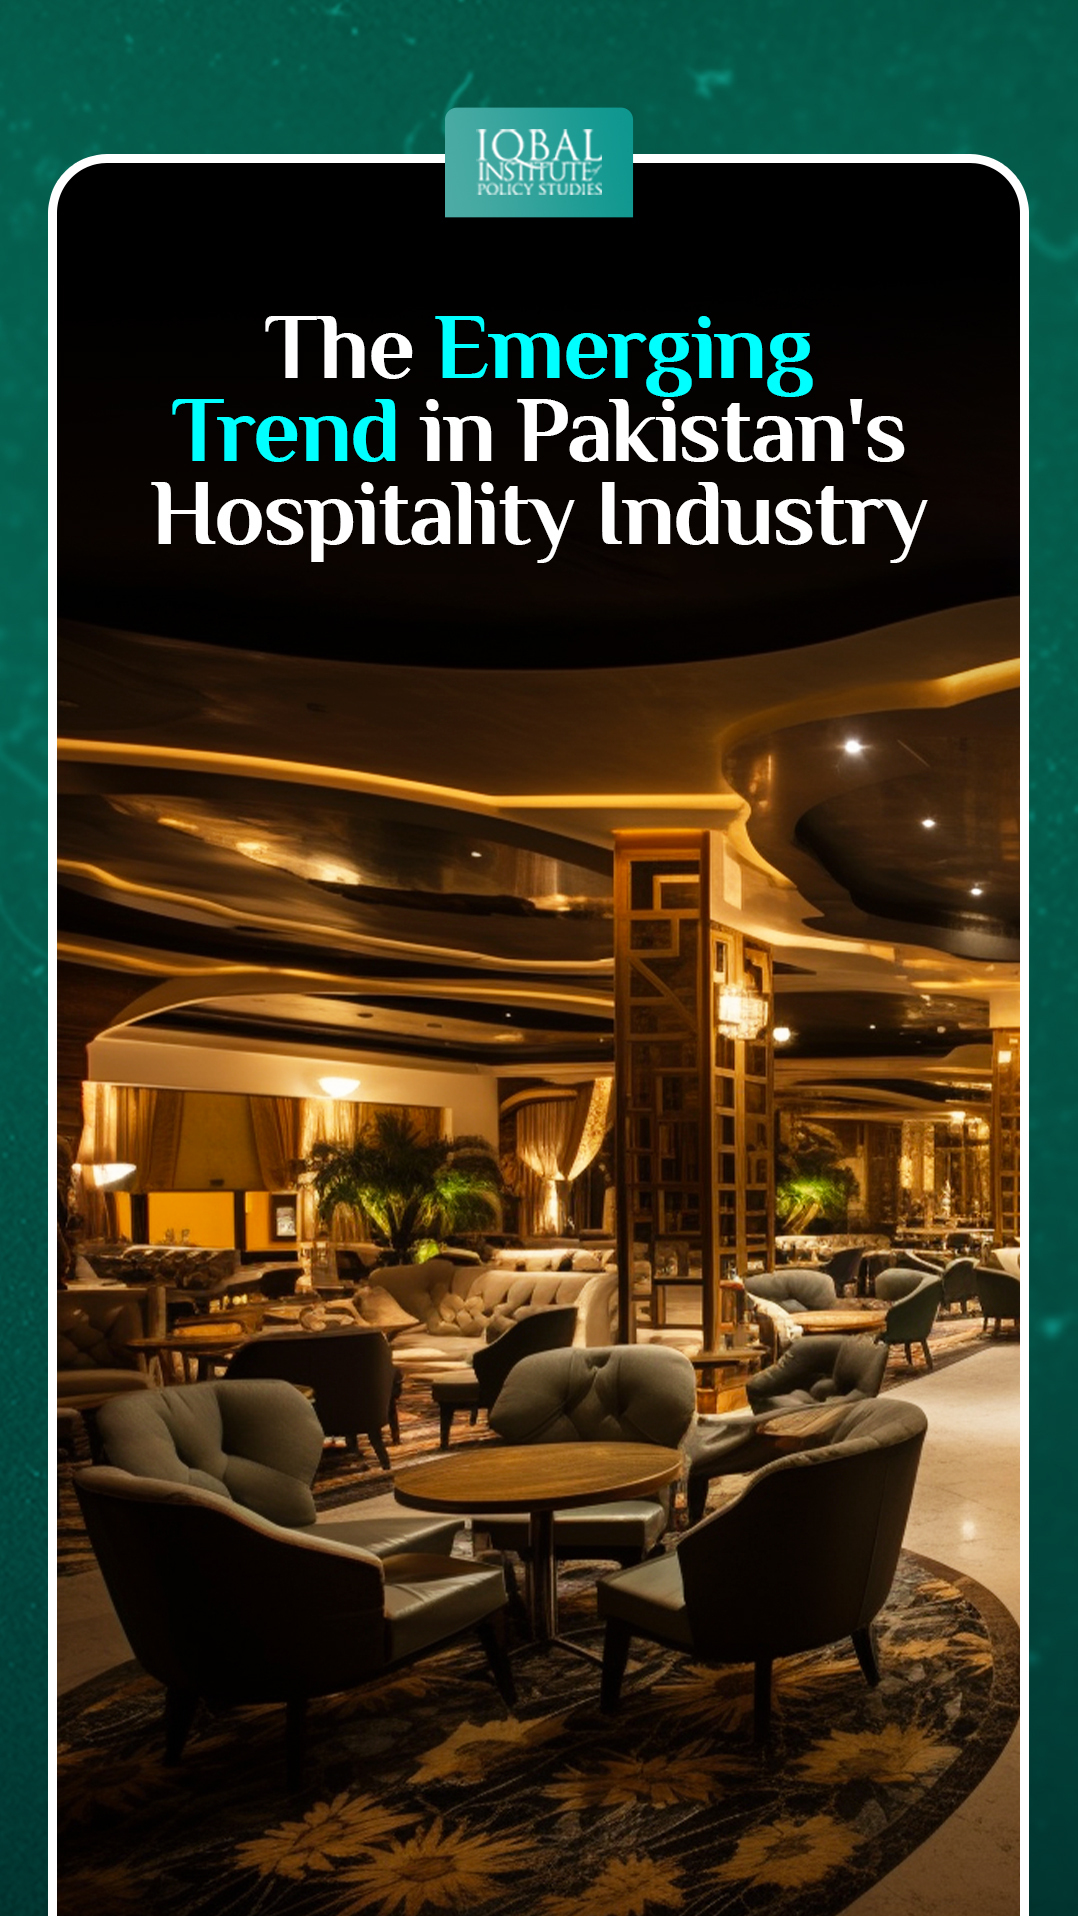 The Emerging Trend in Pakistan's Hospitality Industry